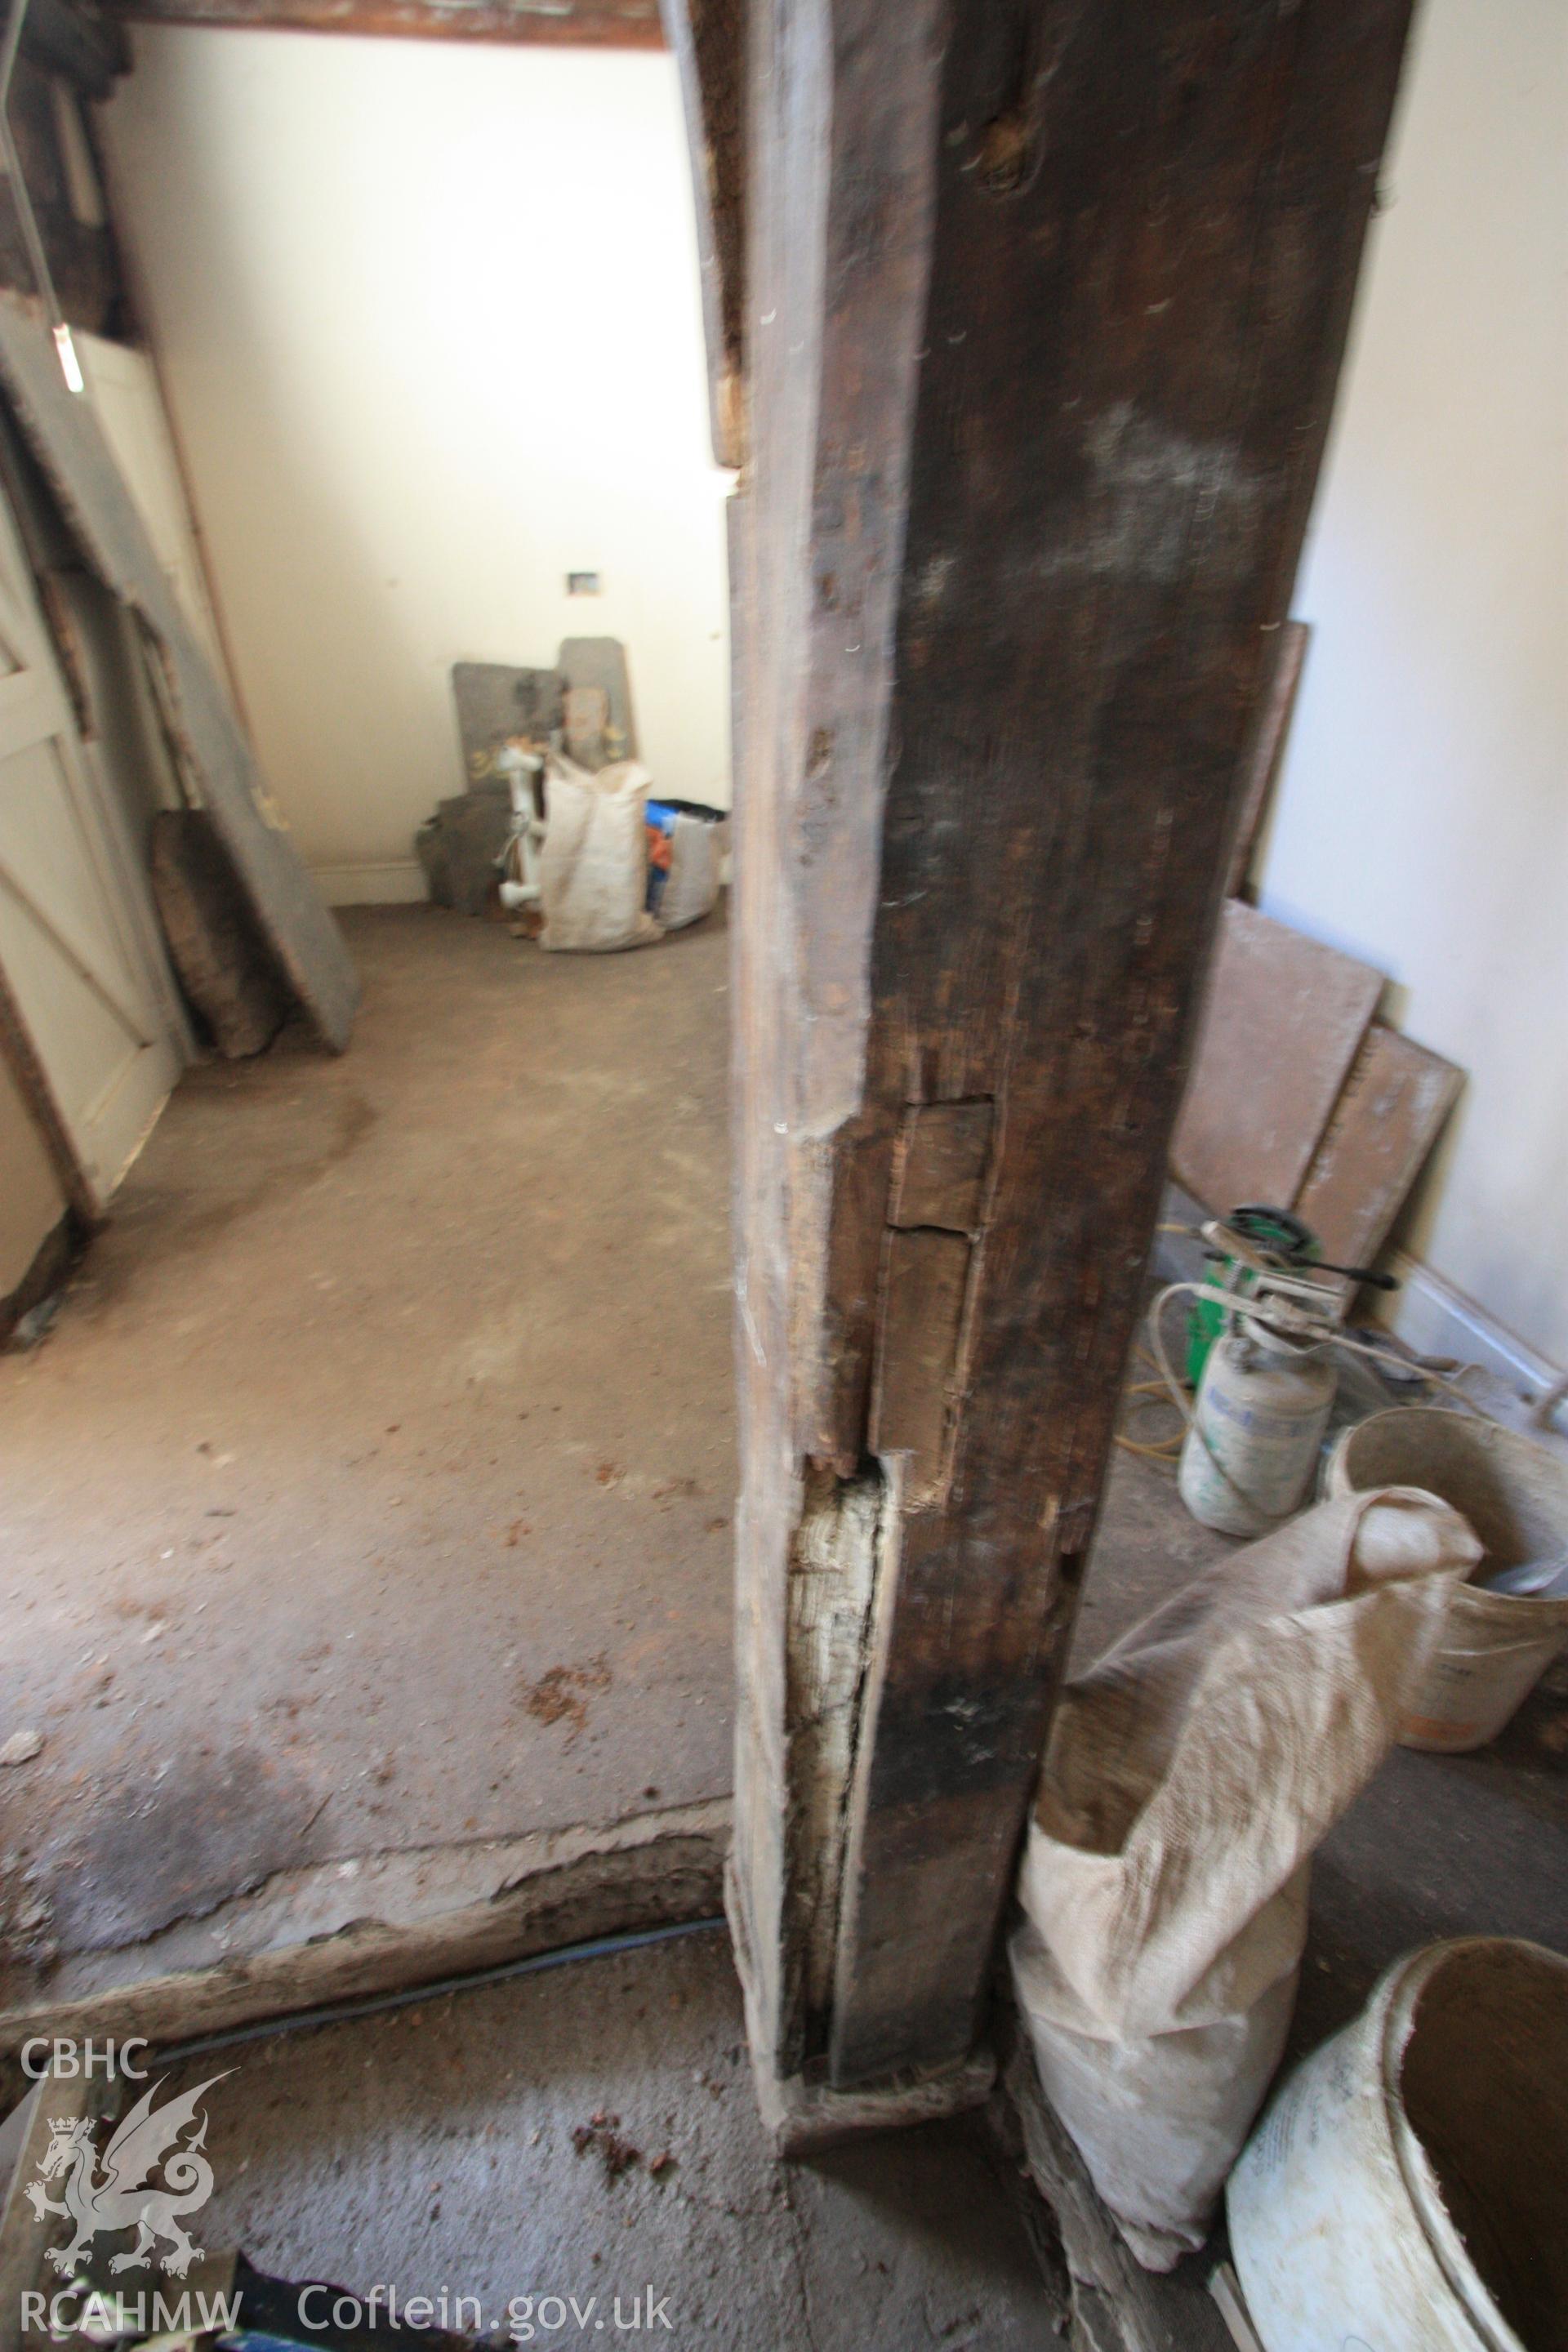 Colour photograph showing interior timber support post at Porth-y-Dwr, 67 Clwyd Street, Ruthin. Photographed during survey conducted by Geoff Ward on 10th June 2013.